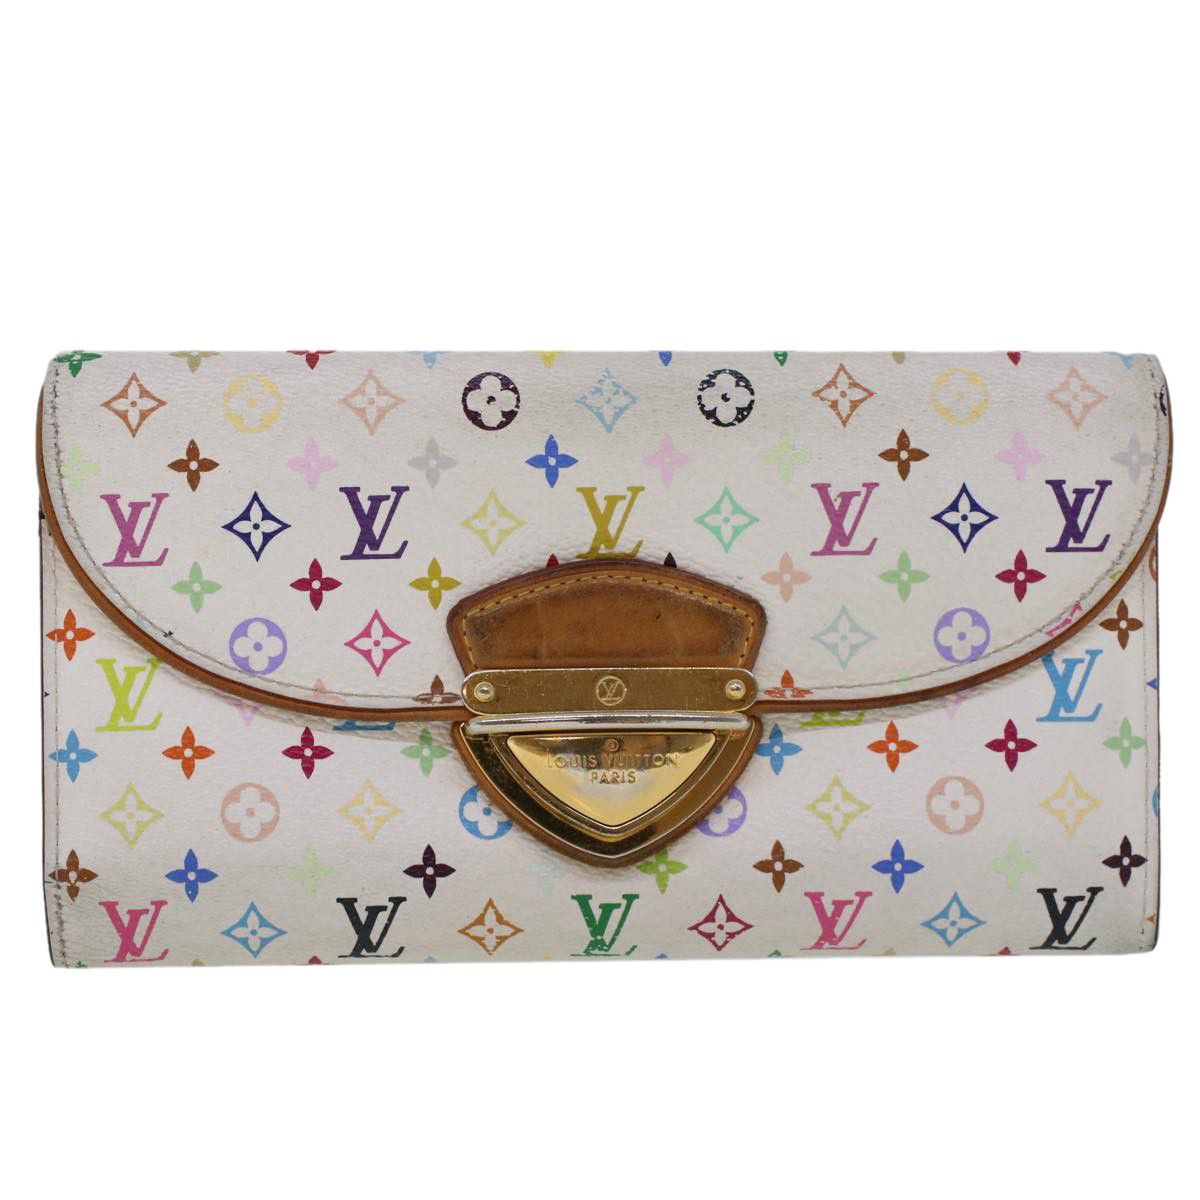 Louis Vuitton M69431 Monogram Card Holder Recto Verso shipped from Japan